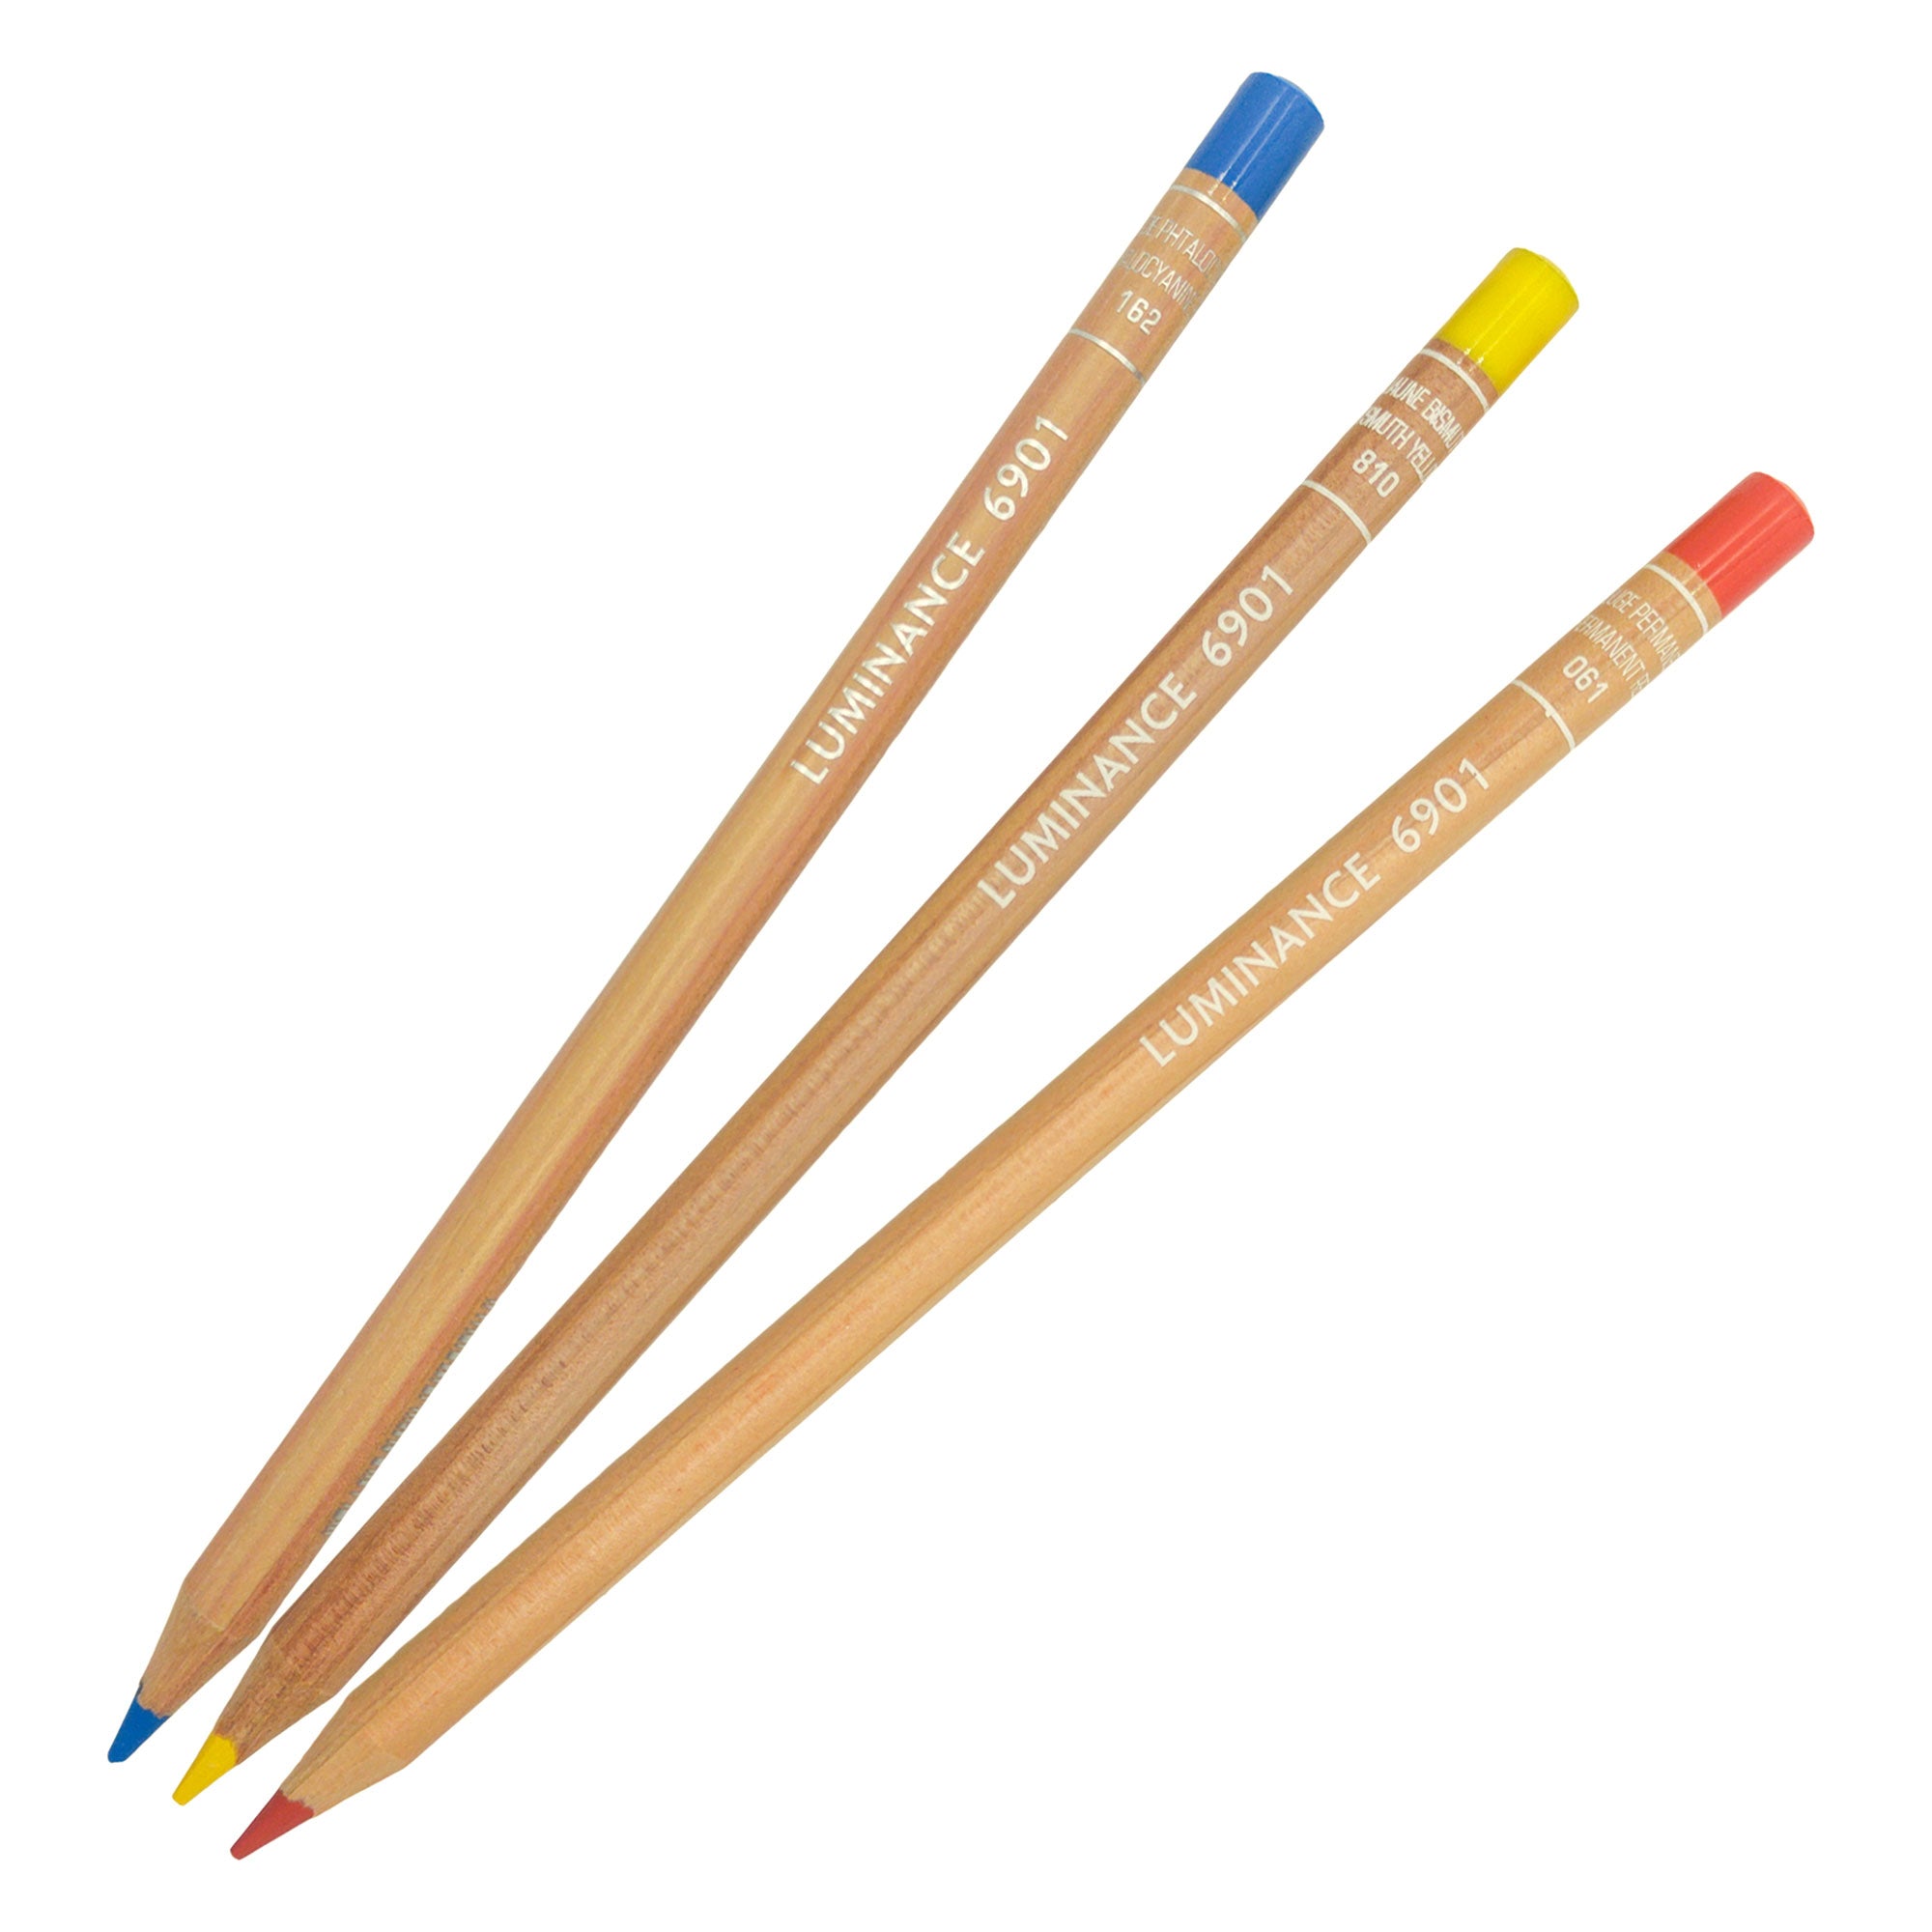 Caran d'Ache LUMINANCE 6901® Individual Pencils - Phthalo Blue, Bismuth Yellow, Permanent Red